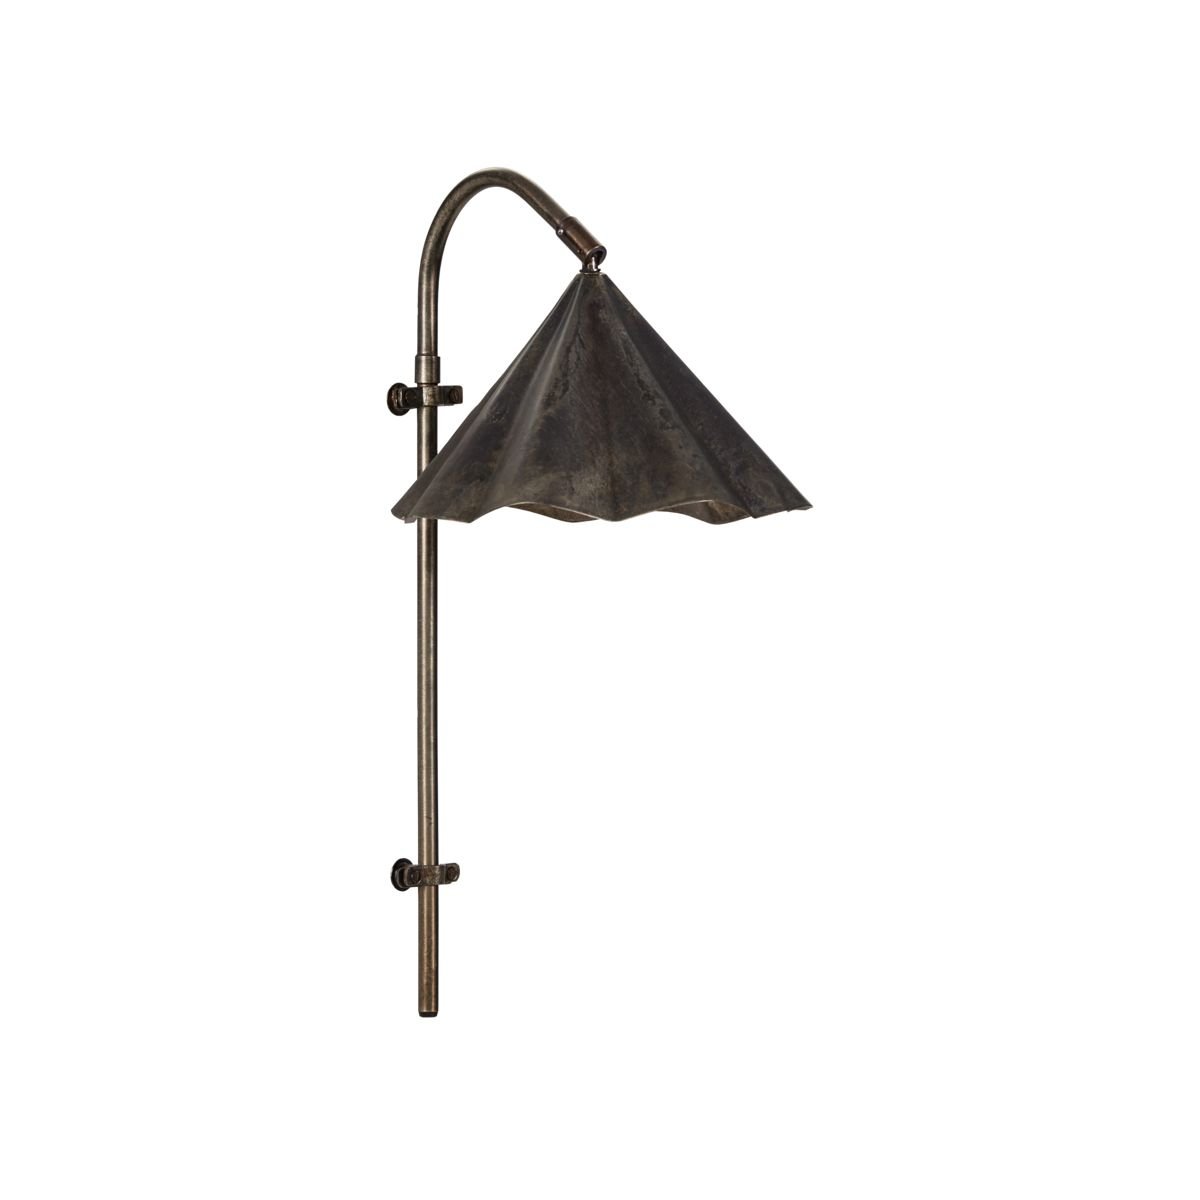 House doctor - Wall lamp, Flola, Antique brown (203661112)